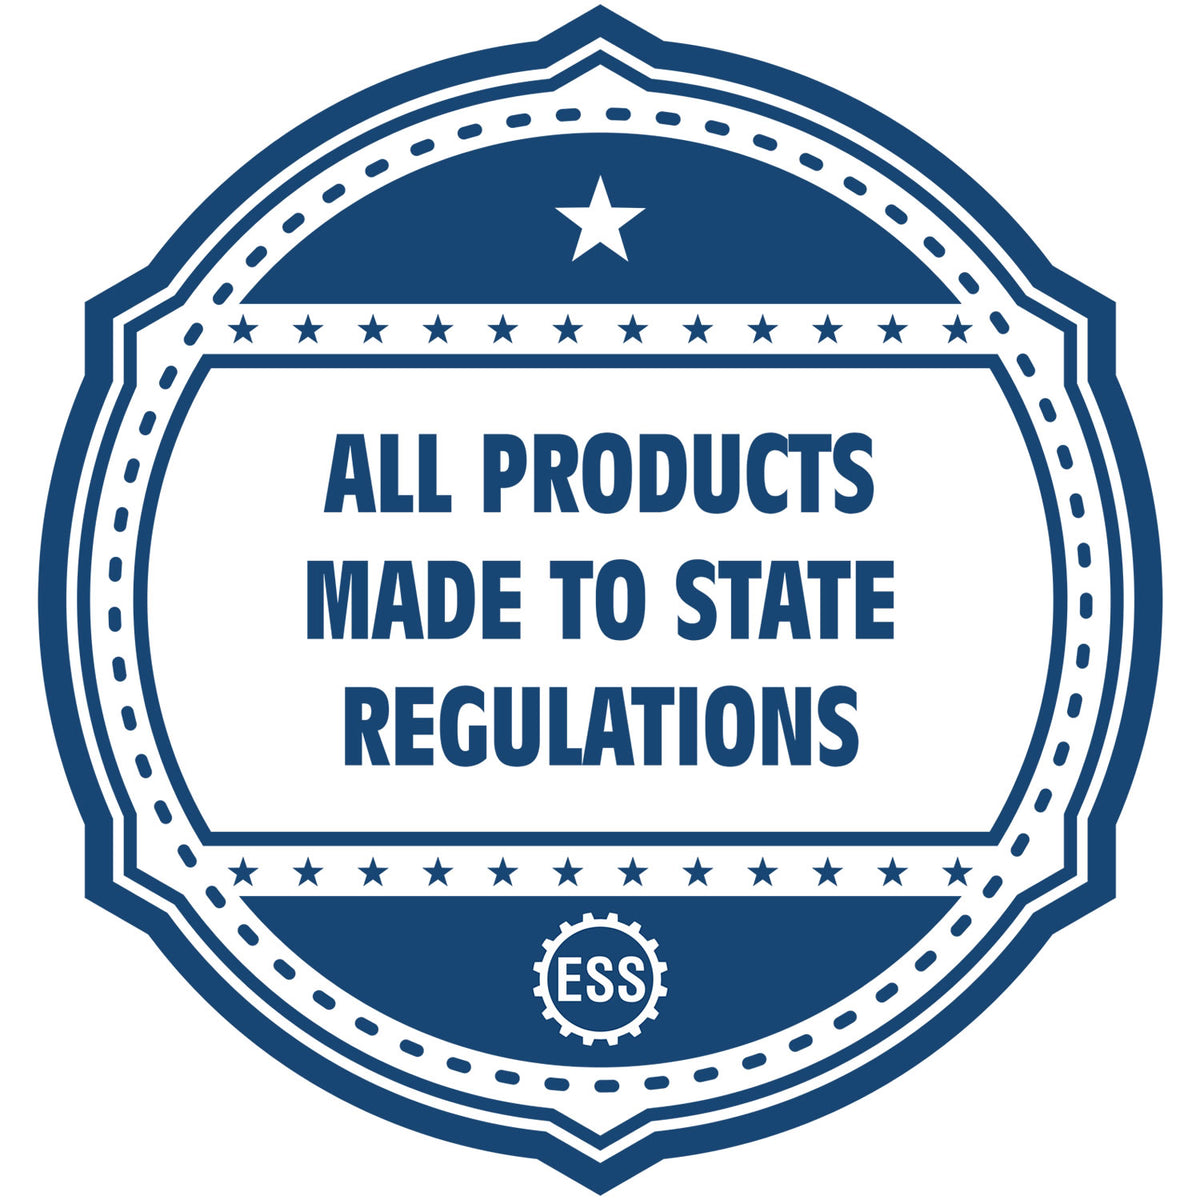 An icon or badge element for the Soft Pocket Ohio Landscape Architect Embosser showing that this product is made in compliance with state regulations.